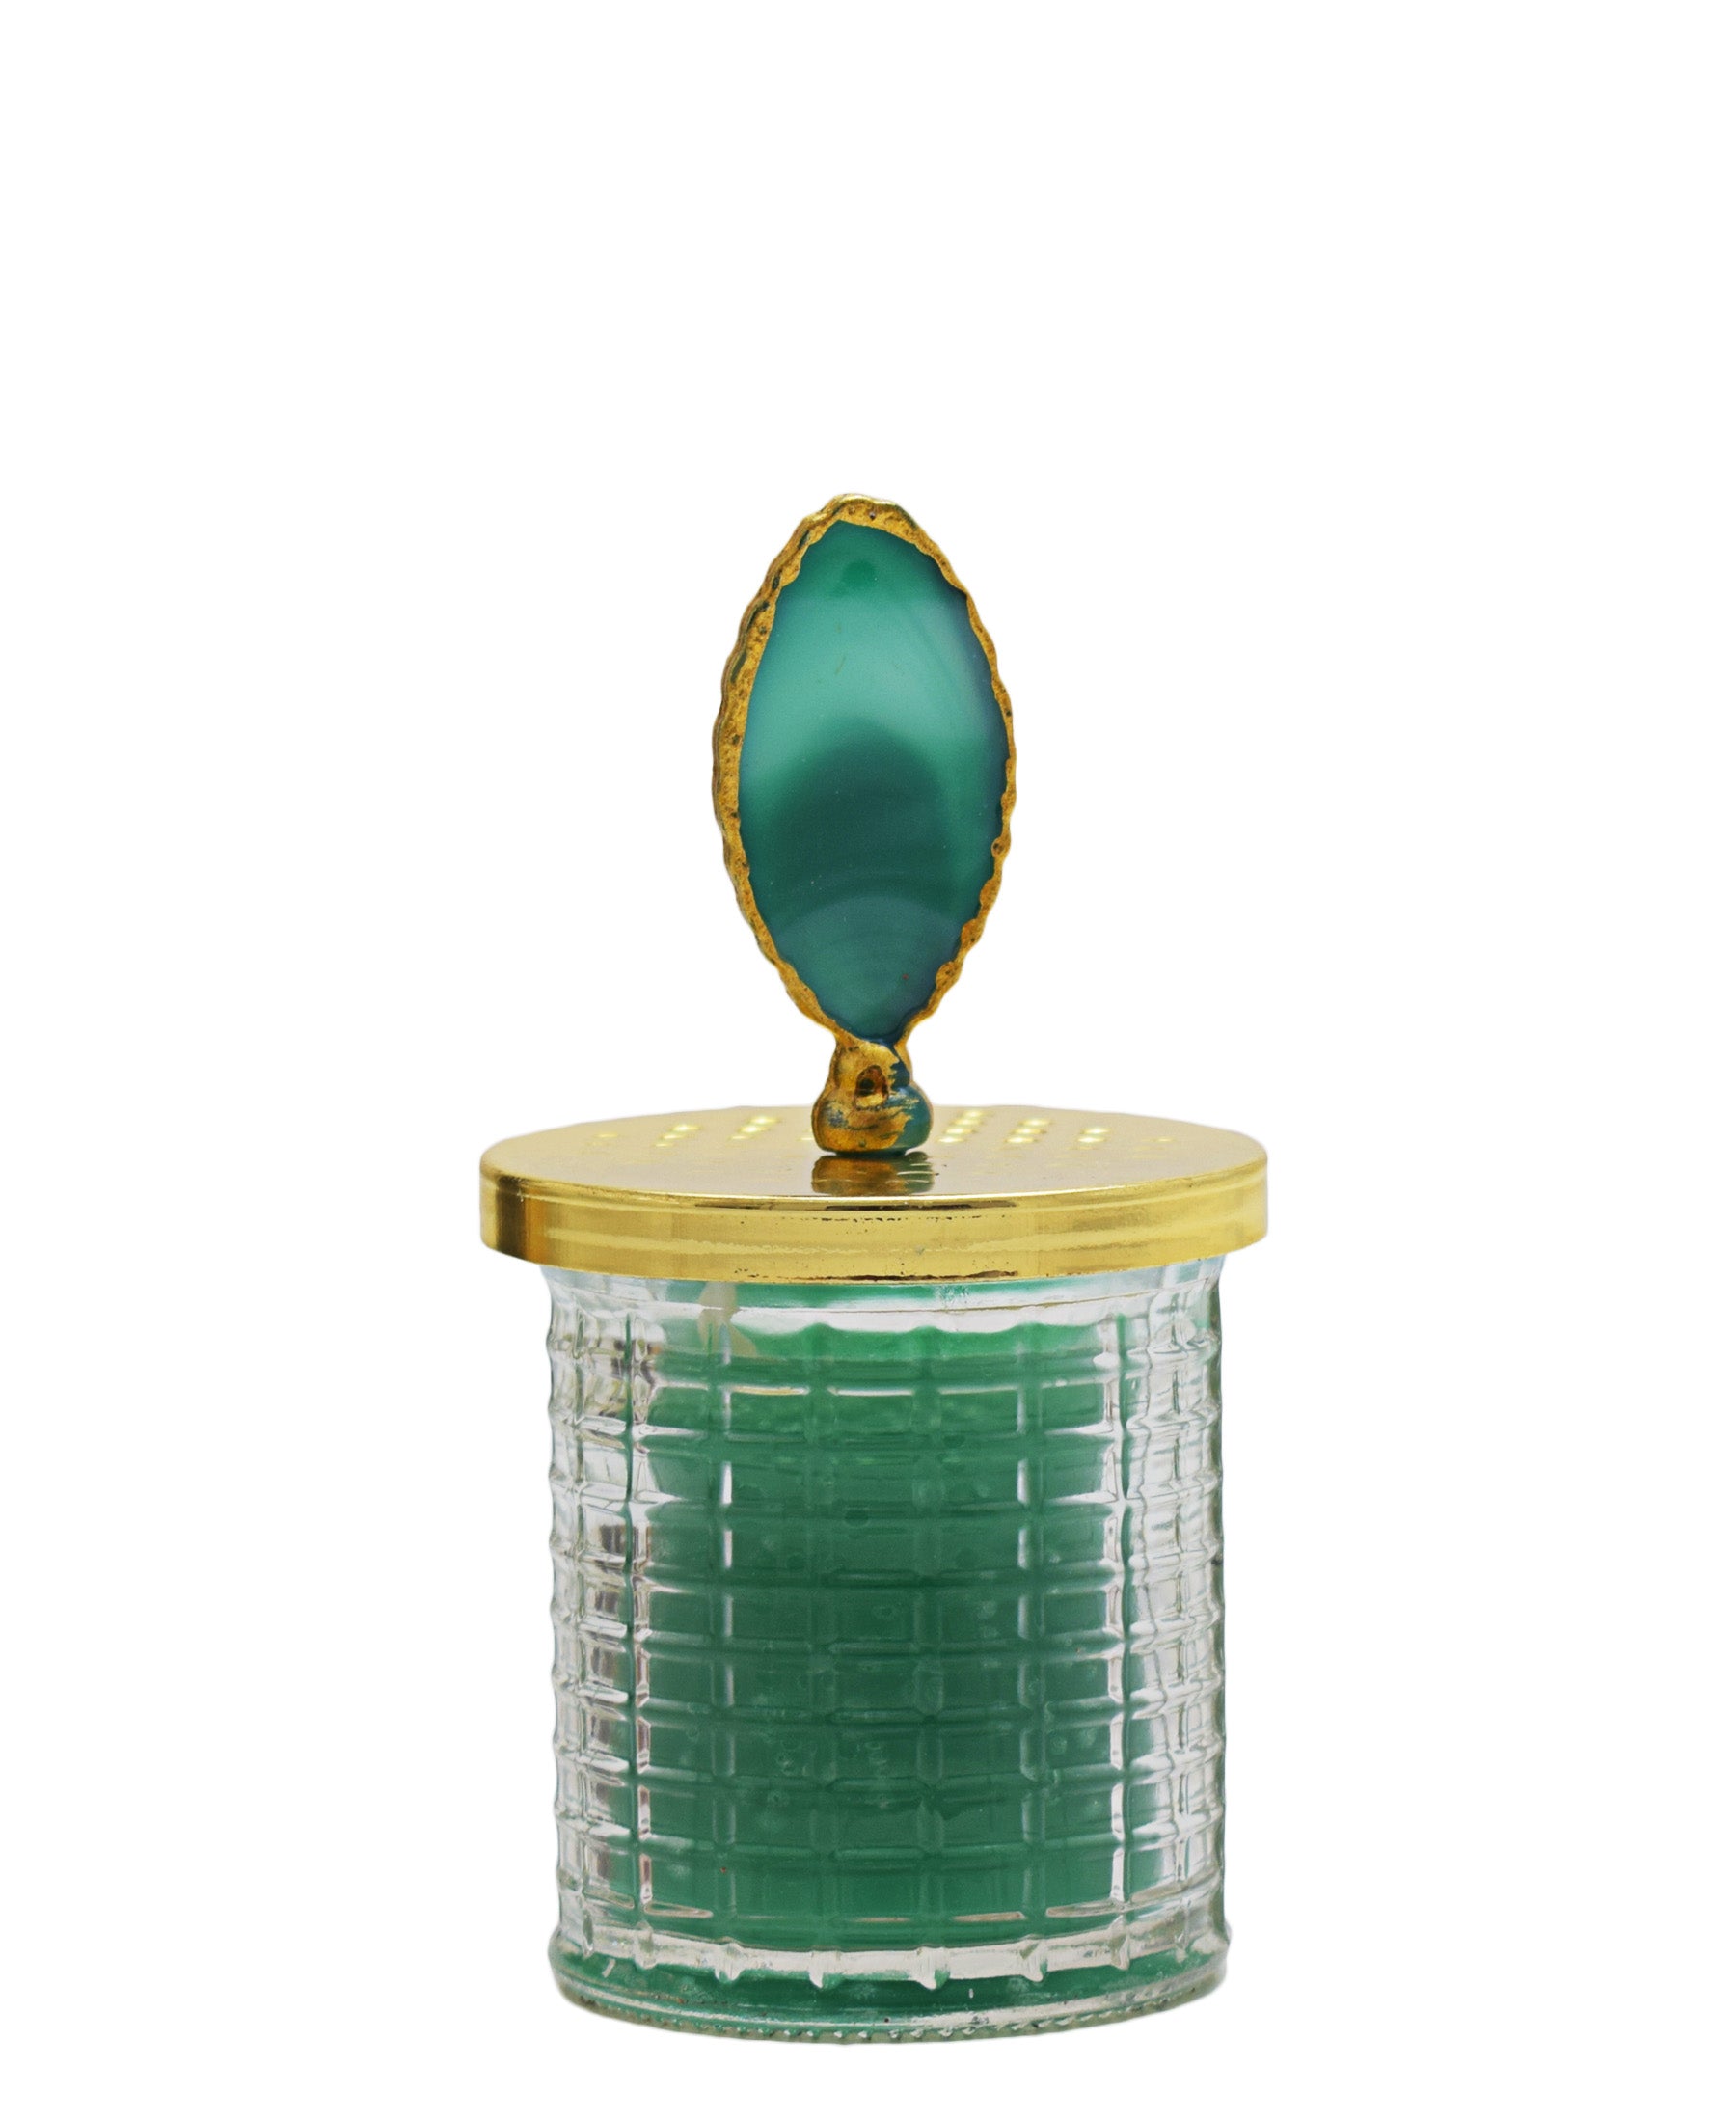 Urban Decor Scented Candle With Glass Jar 11cm - Green